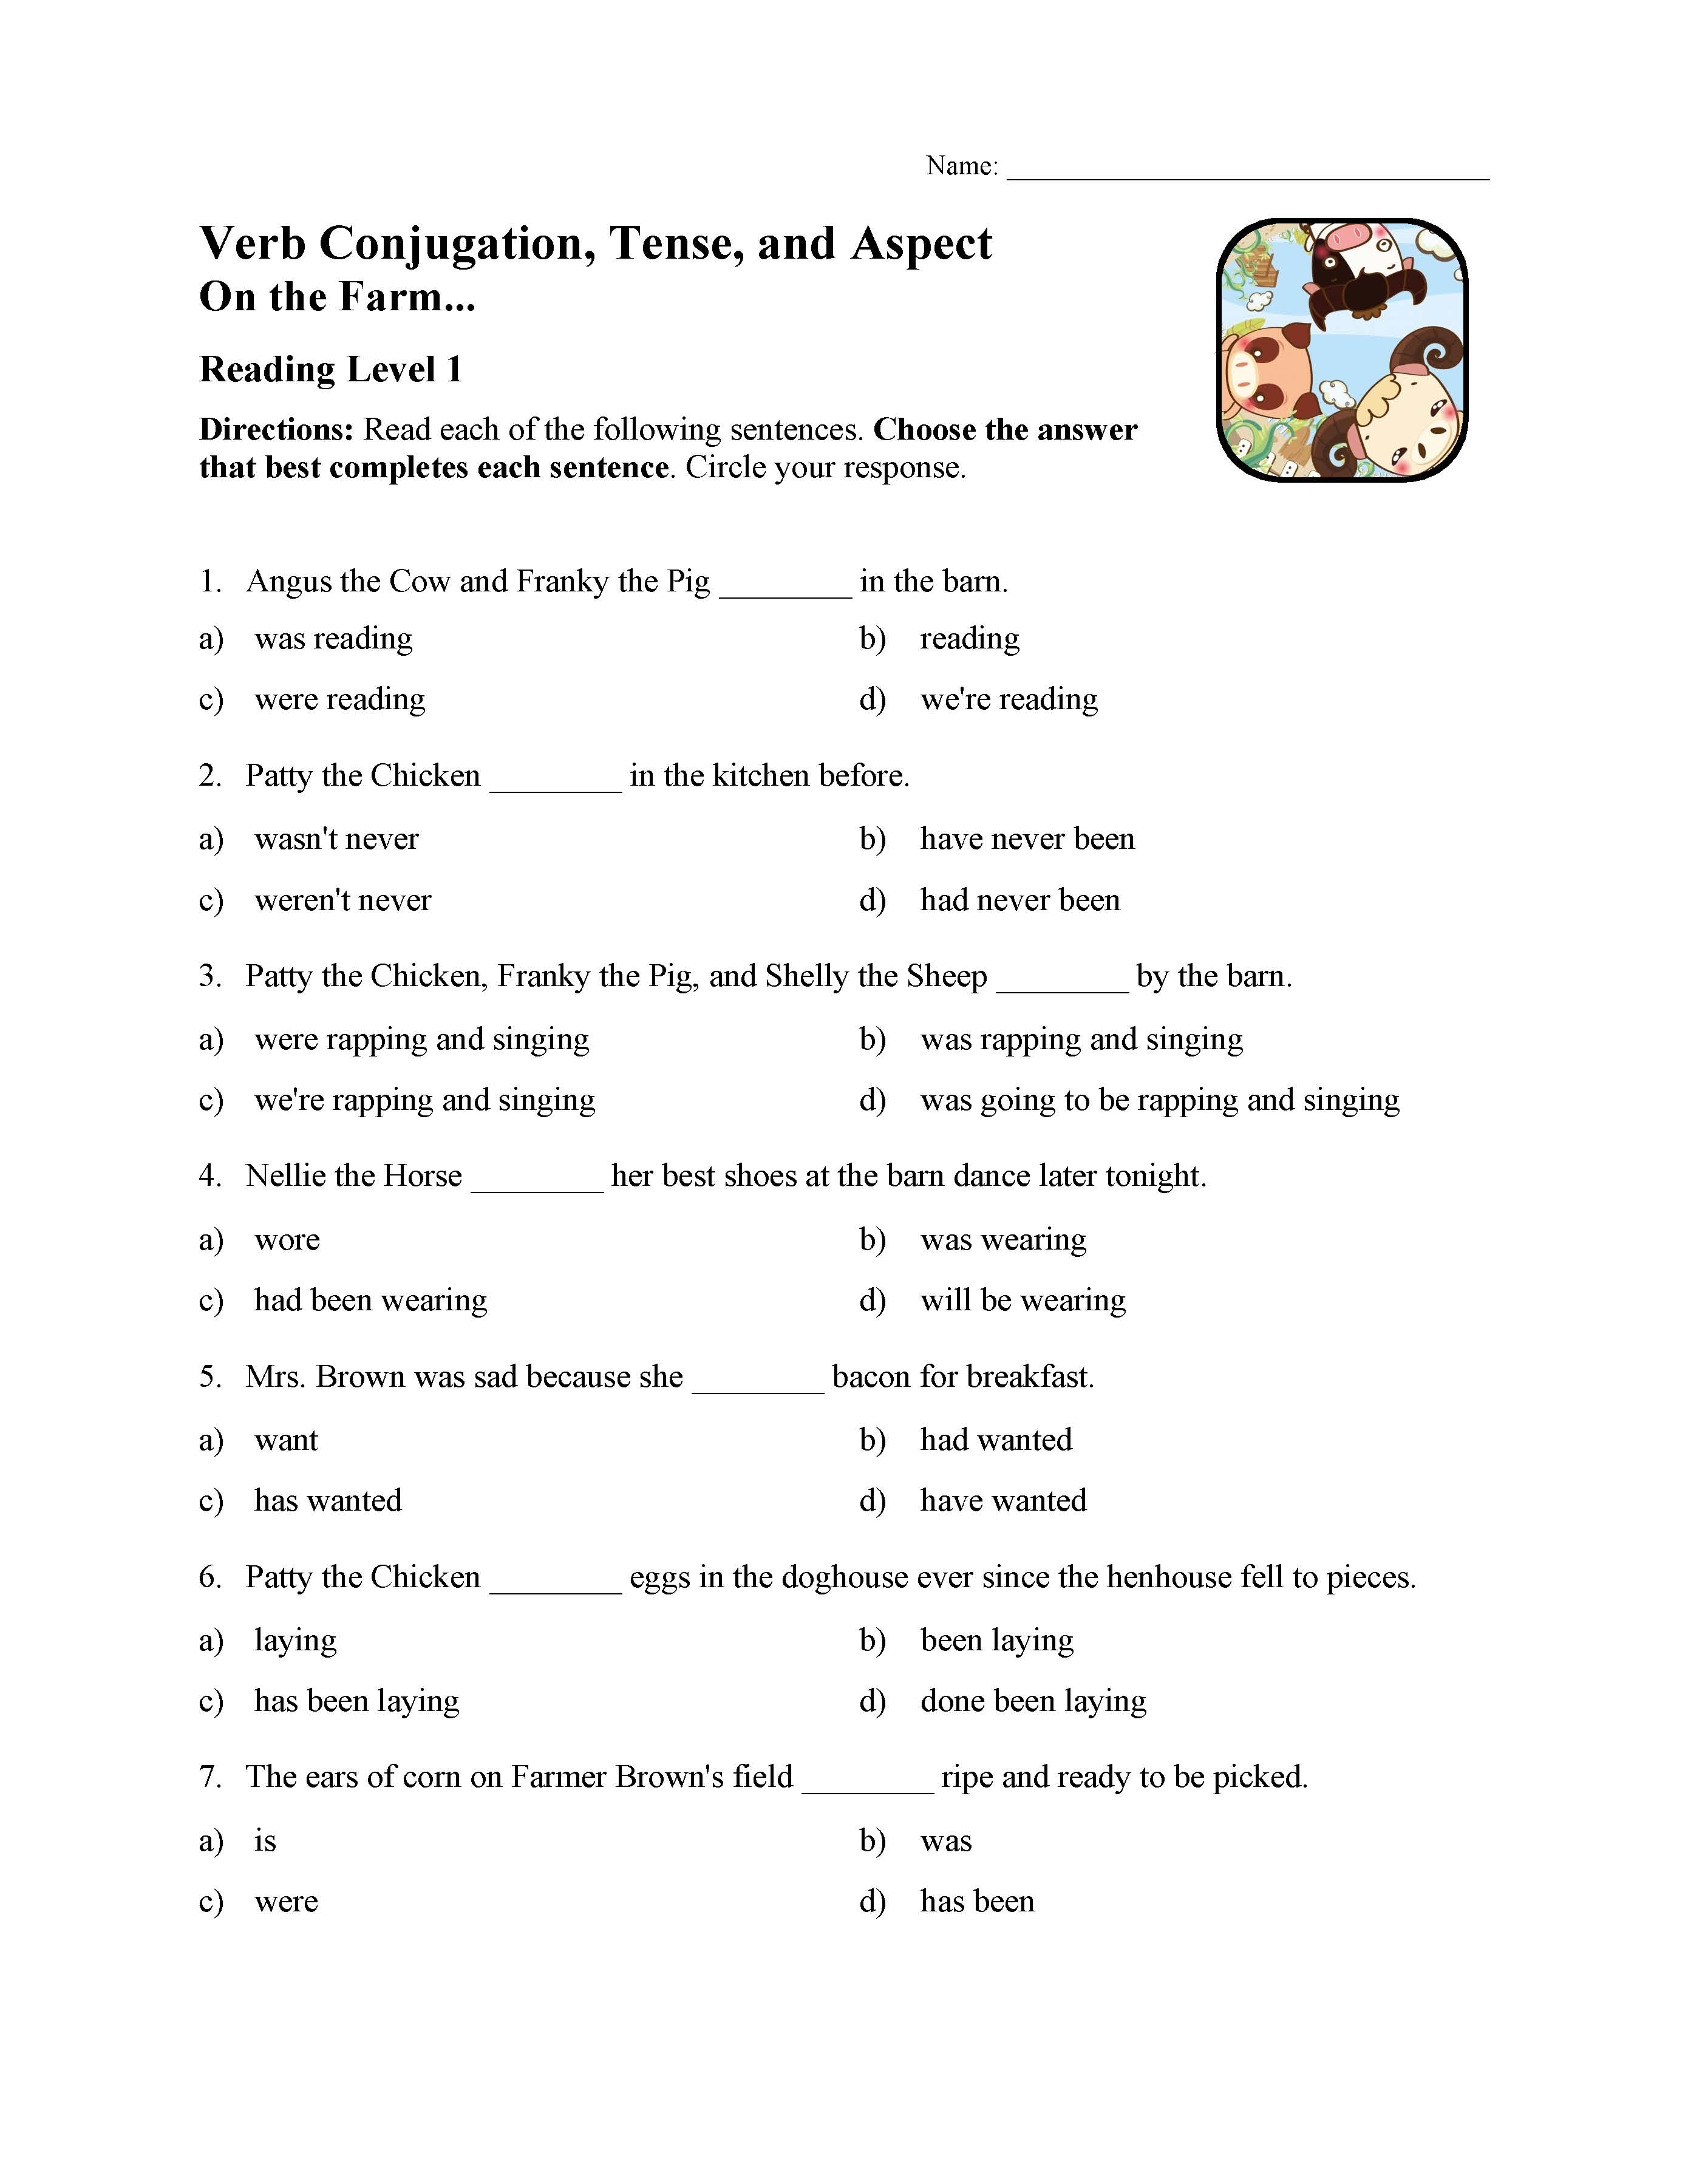 Verb Conjugation Tense And Aspect Test On The Farm Reading Level 